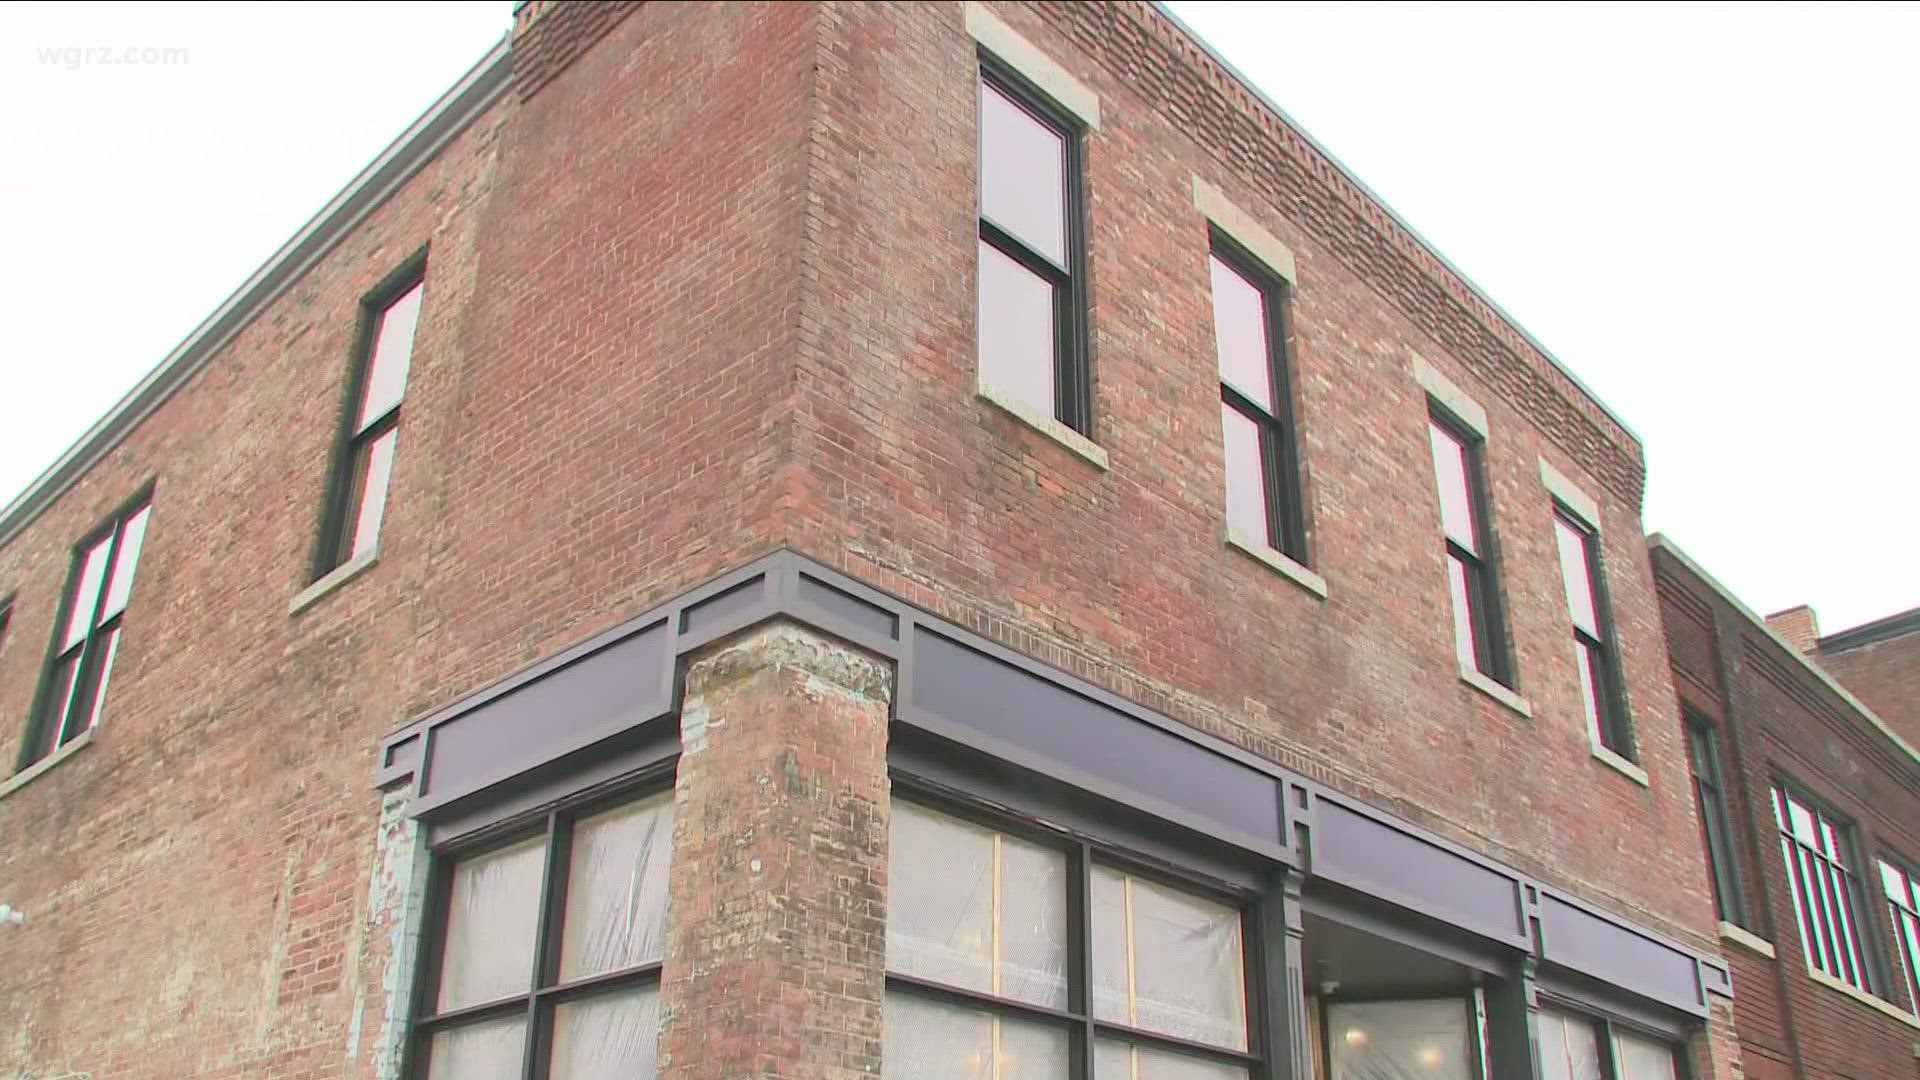 IT WILL BE INSIDE THE NASH LOFTS BUILDING ON BUFFALO'S African American Heritage Corridor.